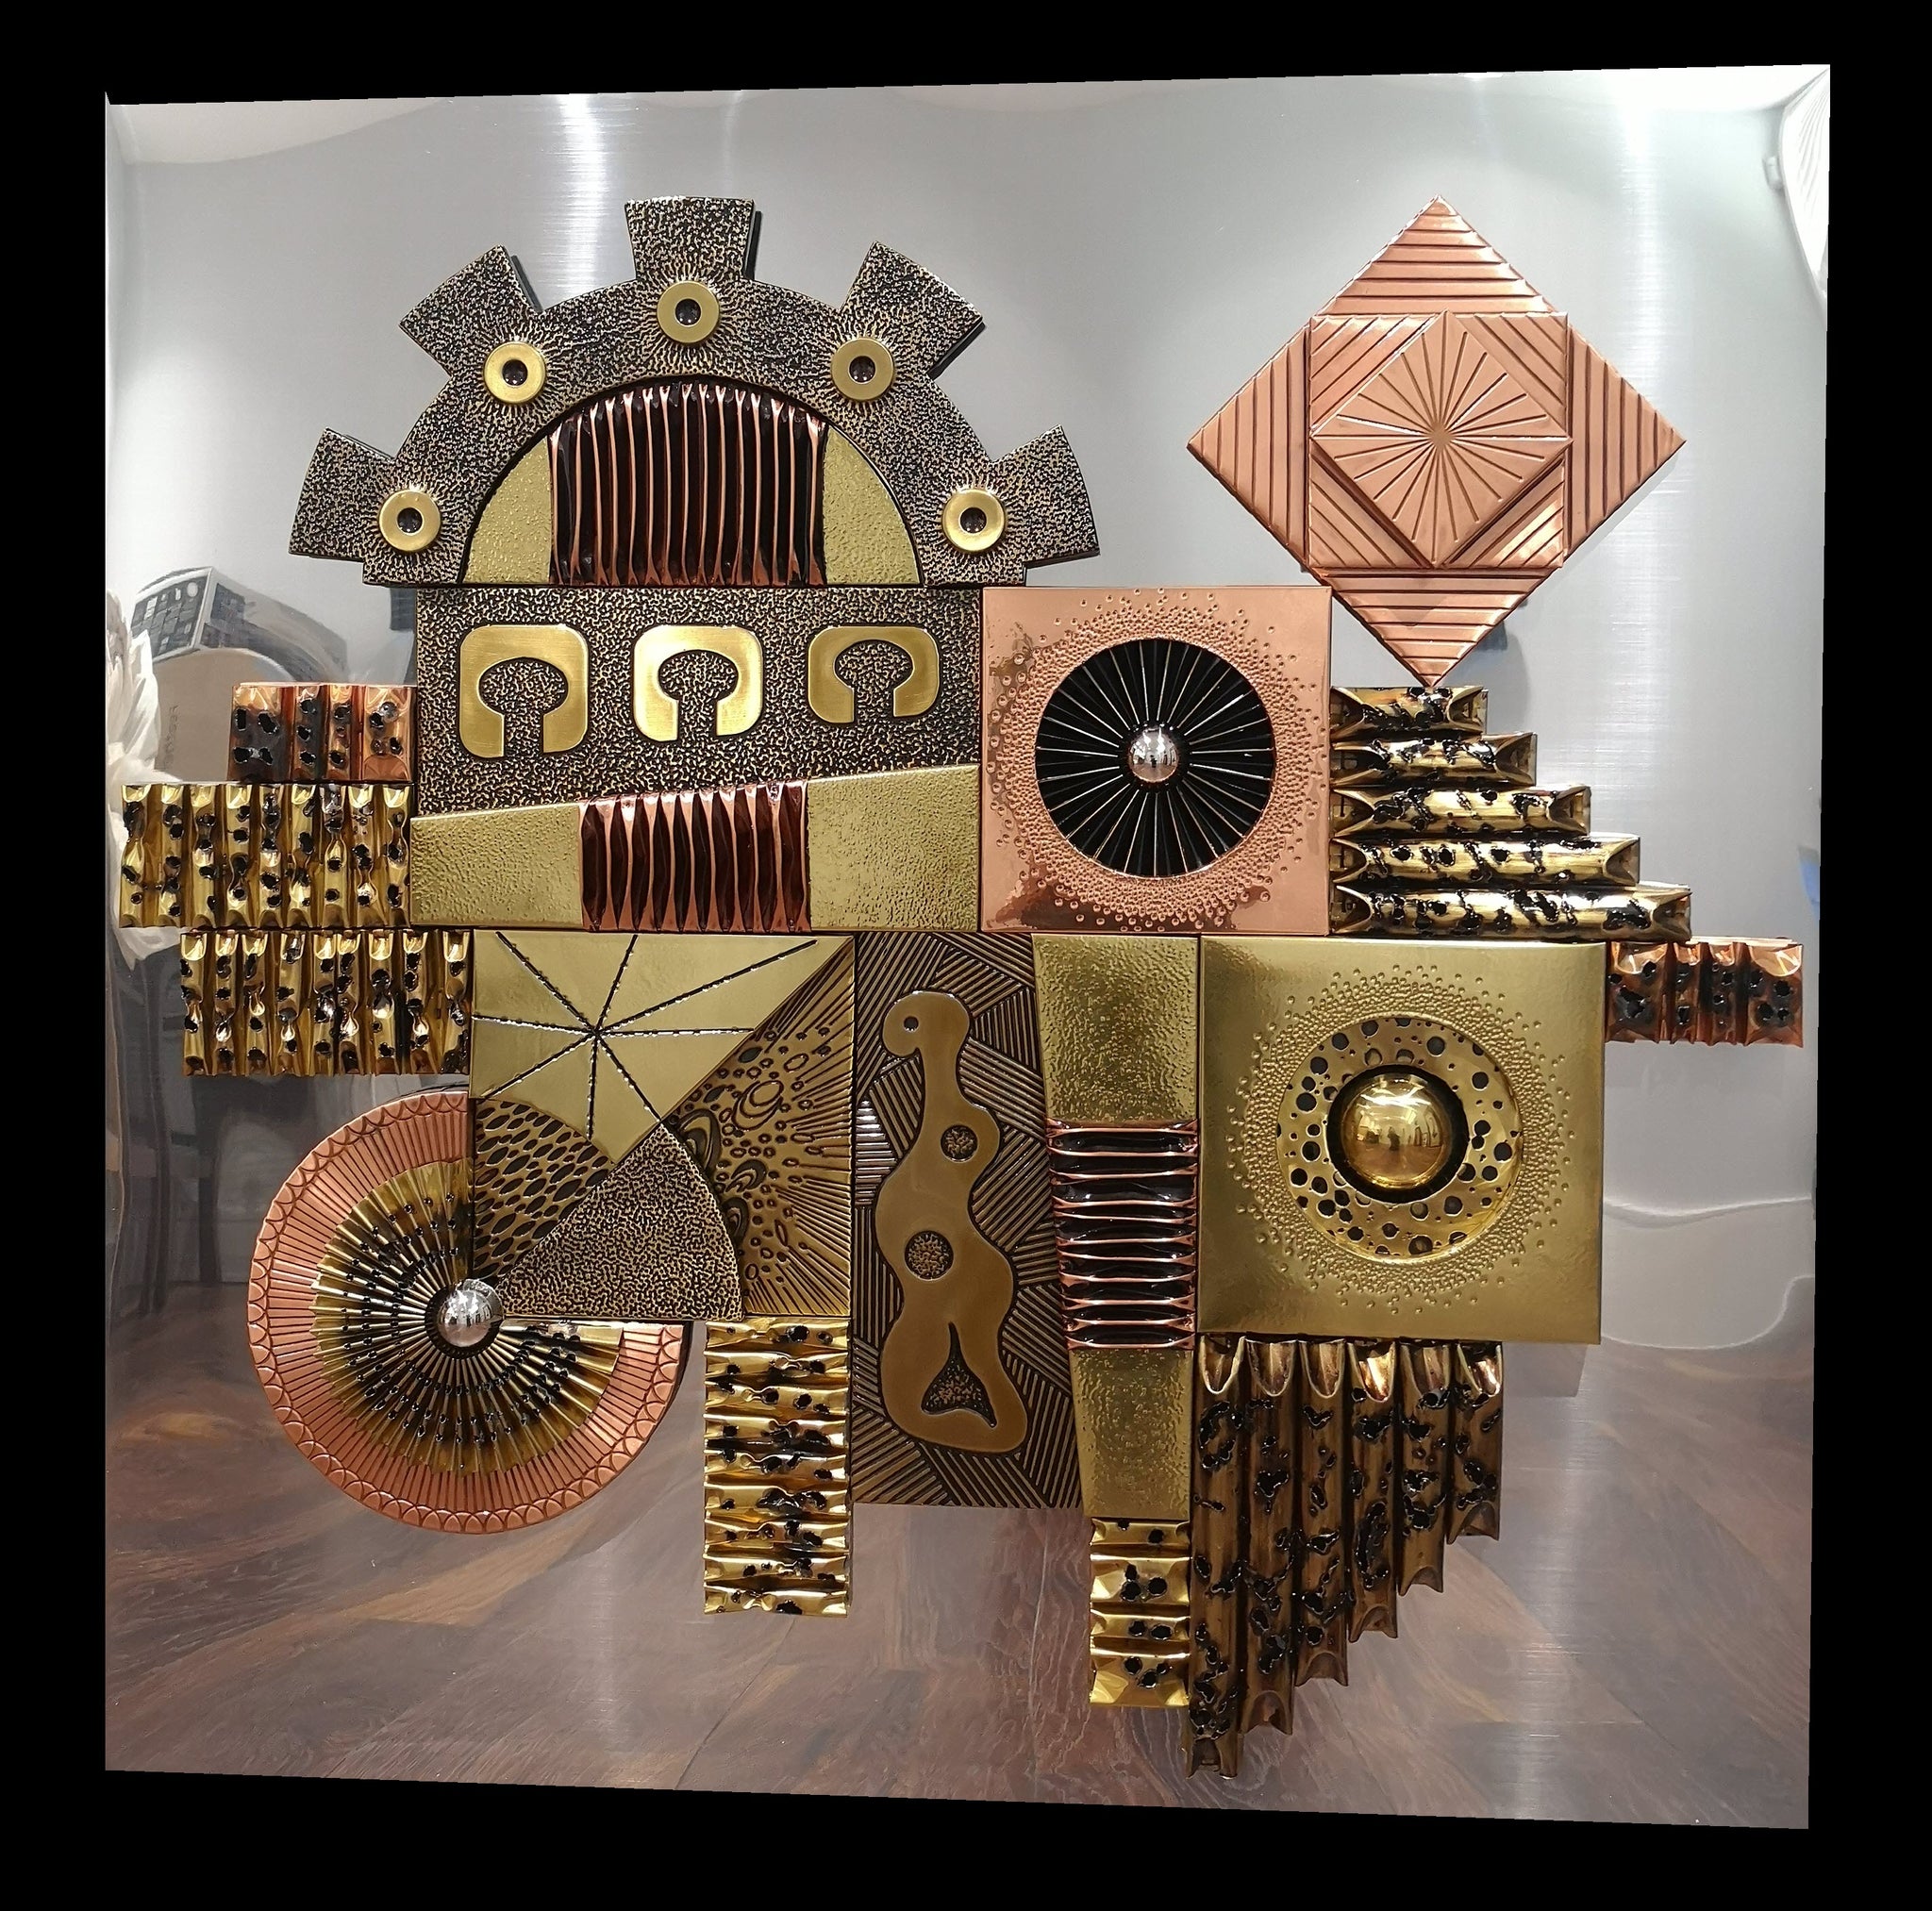 Mixed Metal Brutalist Wall Sculpture by Tito Chau